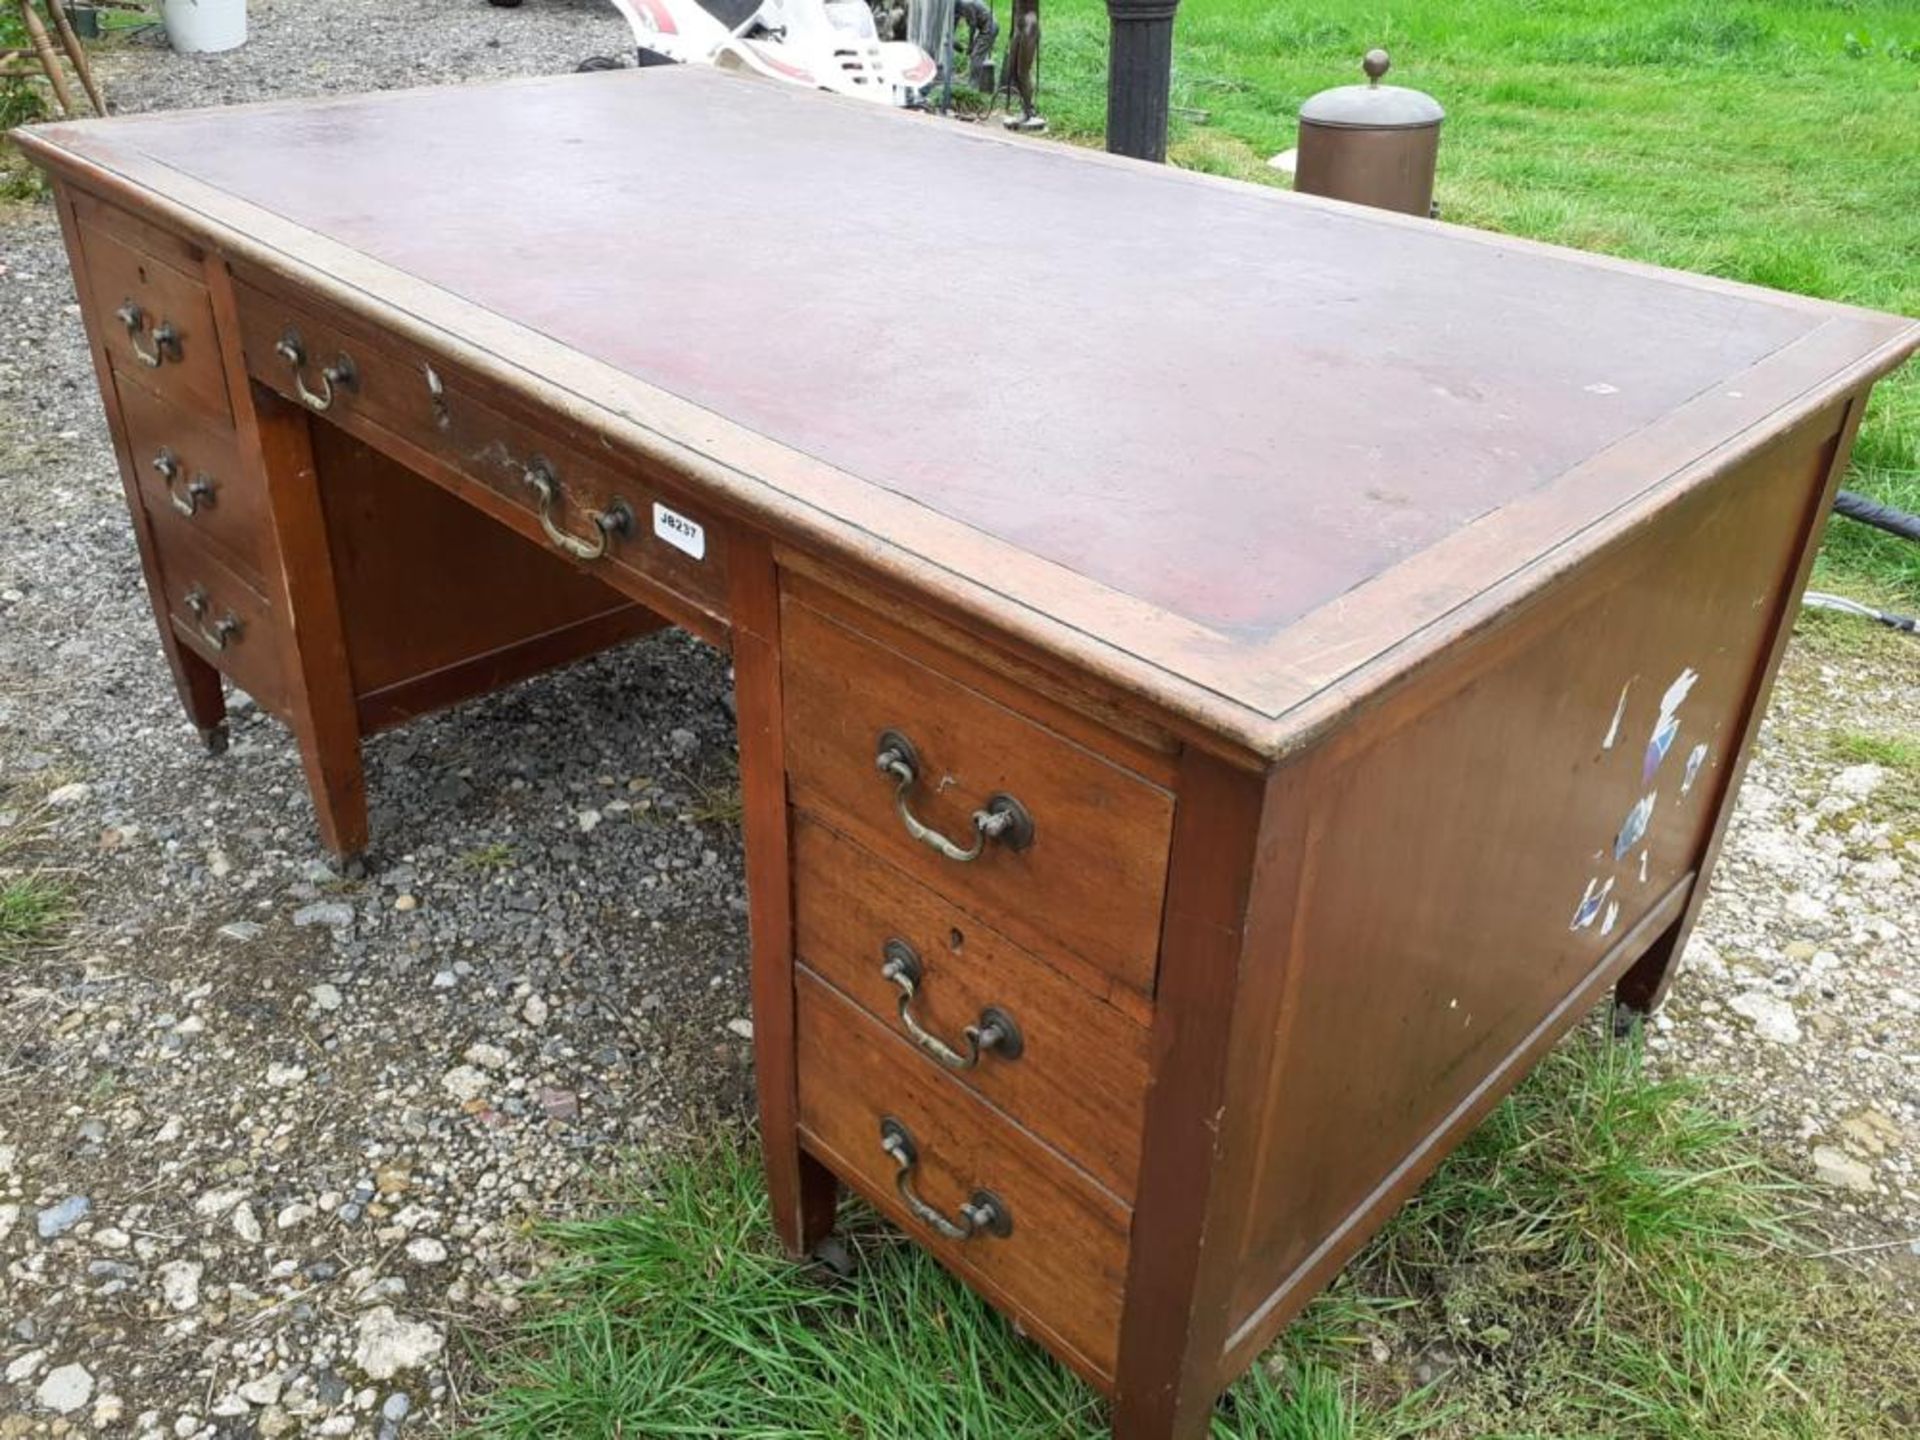 1 x Large Original Writing Desk With Leather Top Pad And Deep Drawers With Original Castors Under - Image 5 of 13